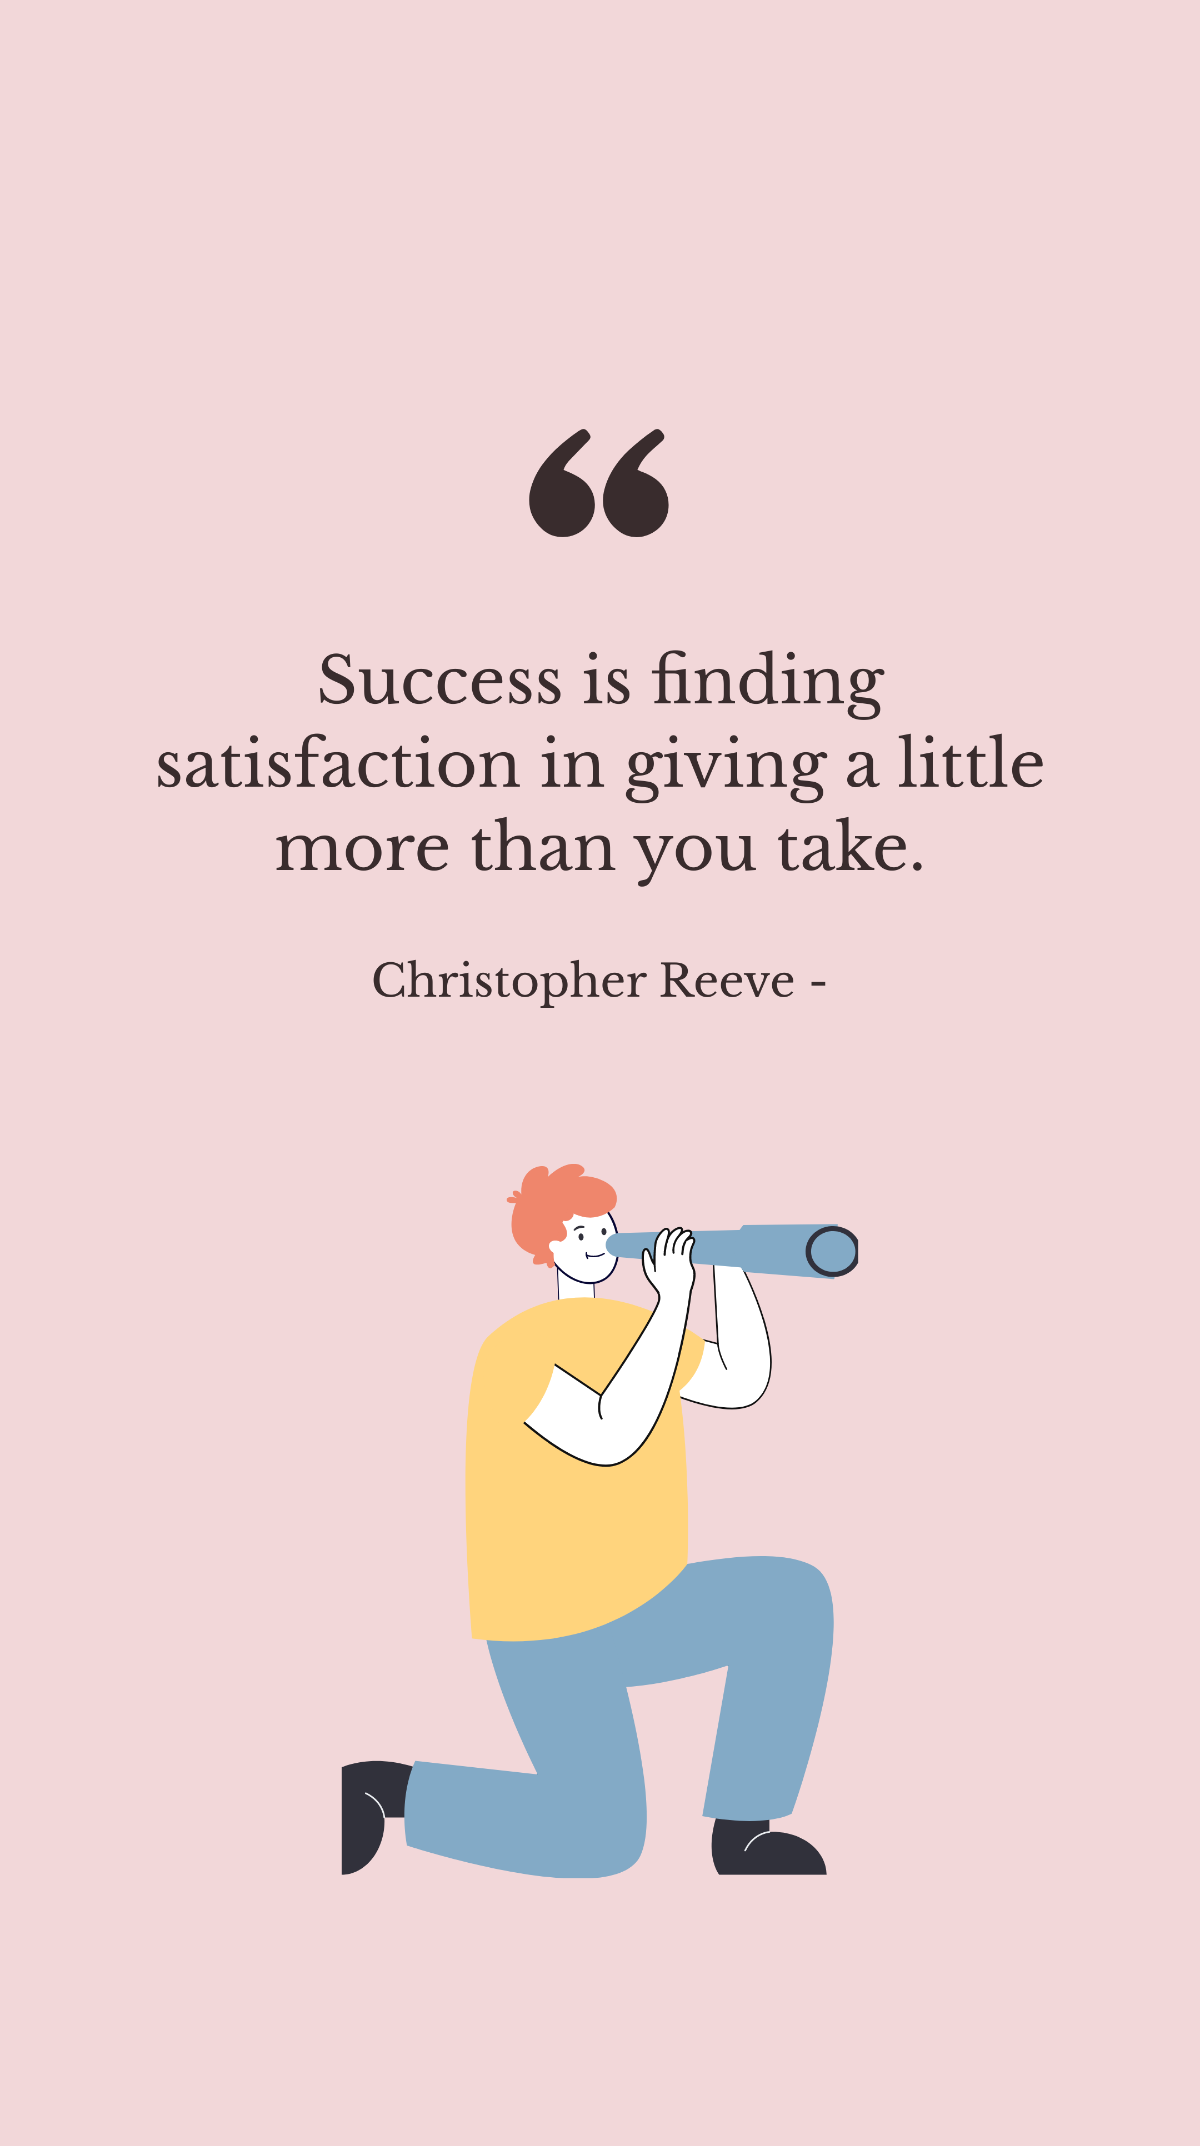 Christopher Reeve - Success is finding satisfaction in giving a little more than you take.